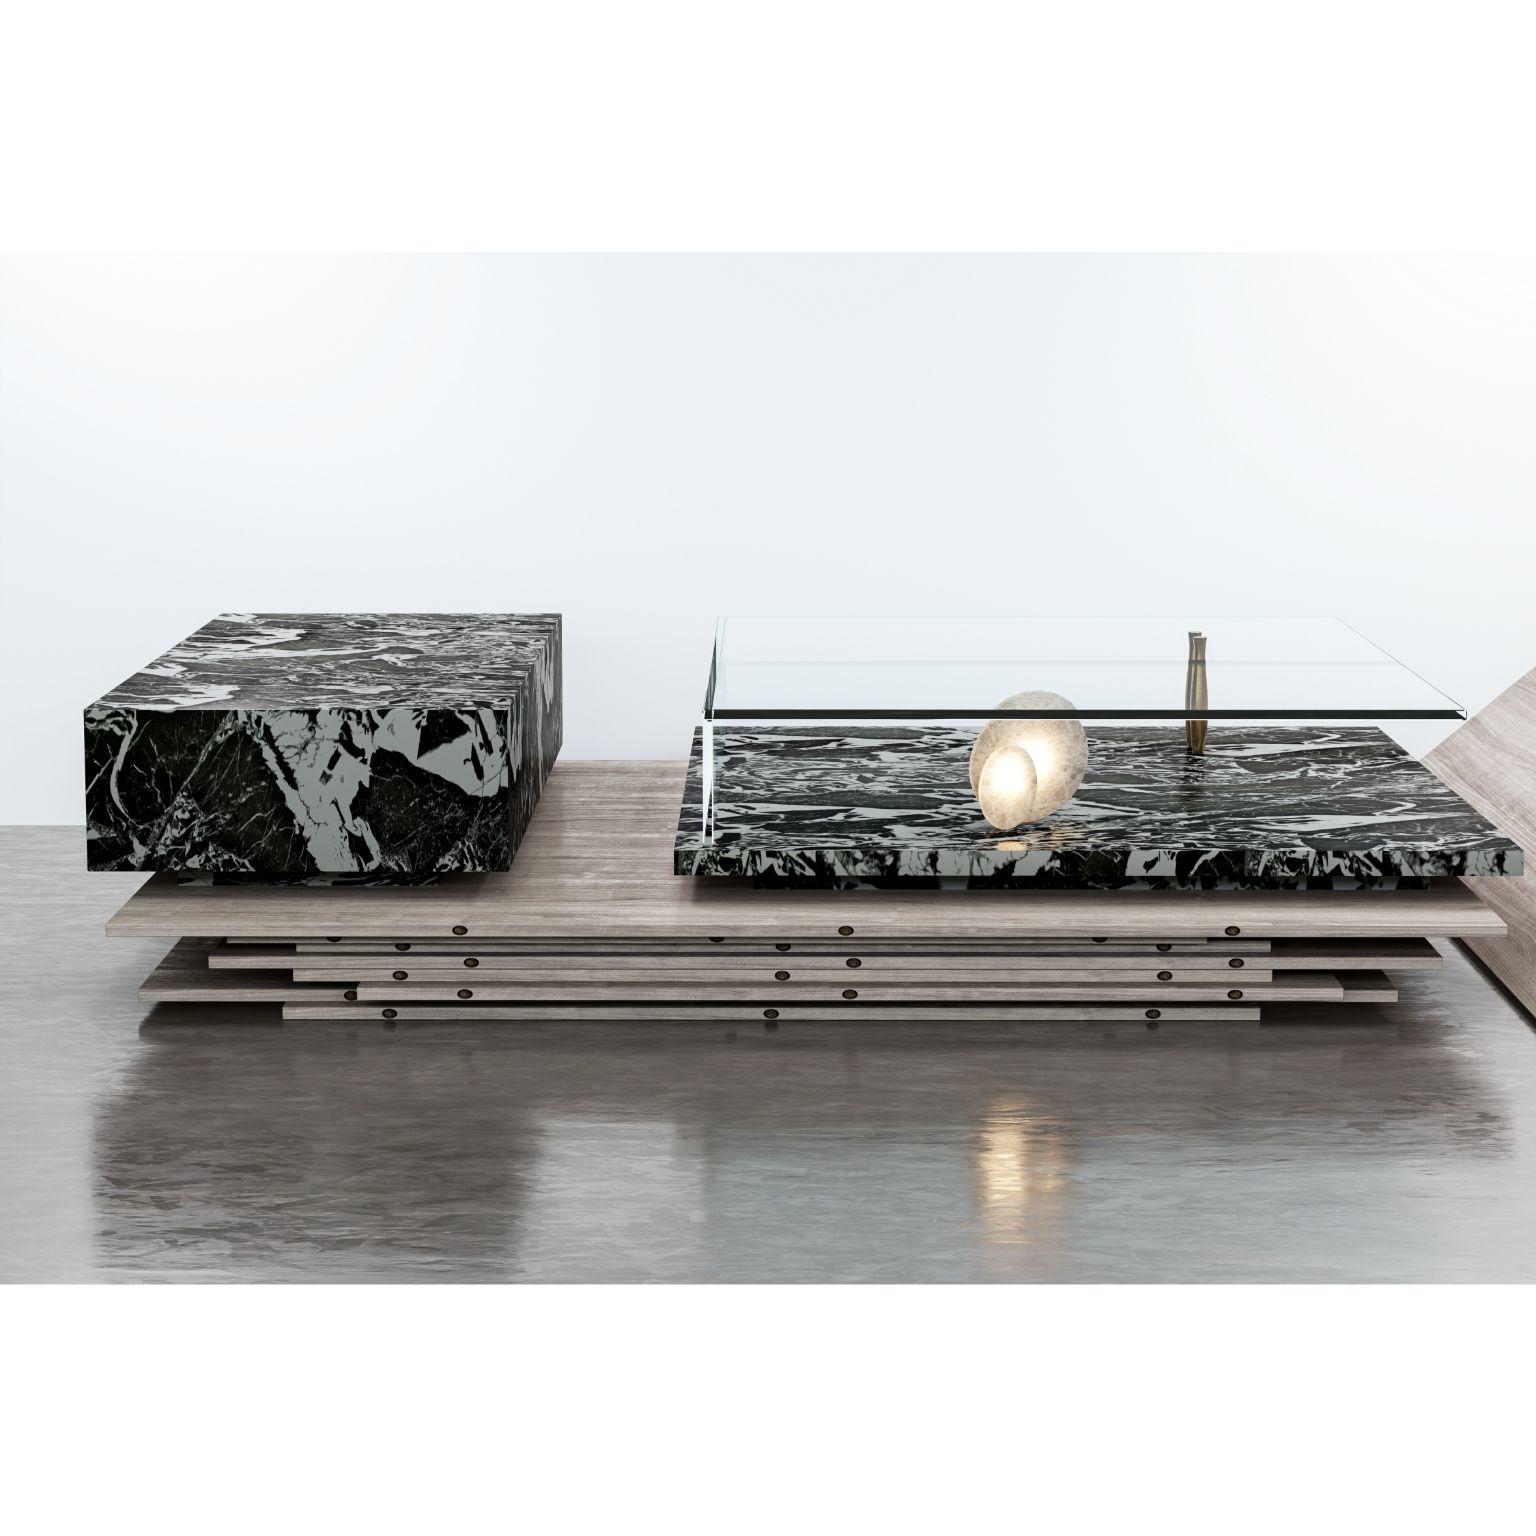 Eclipse coffee table by Simon Hamui
Dimensions: 
Piece 1: D 75 x W 170 x H 34 cm
Piece 2: D 150 x W 170 x H 34 cm 
Materials: Stone, Glass, Brass, Onyx
Prices may vary according to the finish chosen.
Also available in different dimensions.